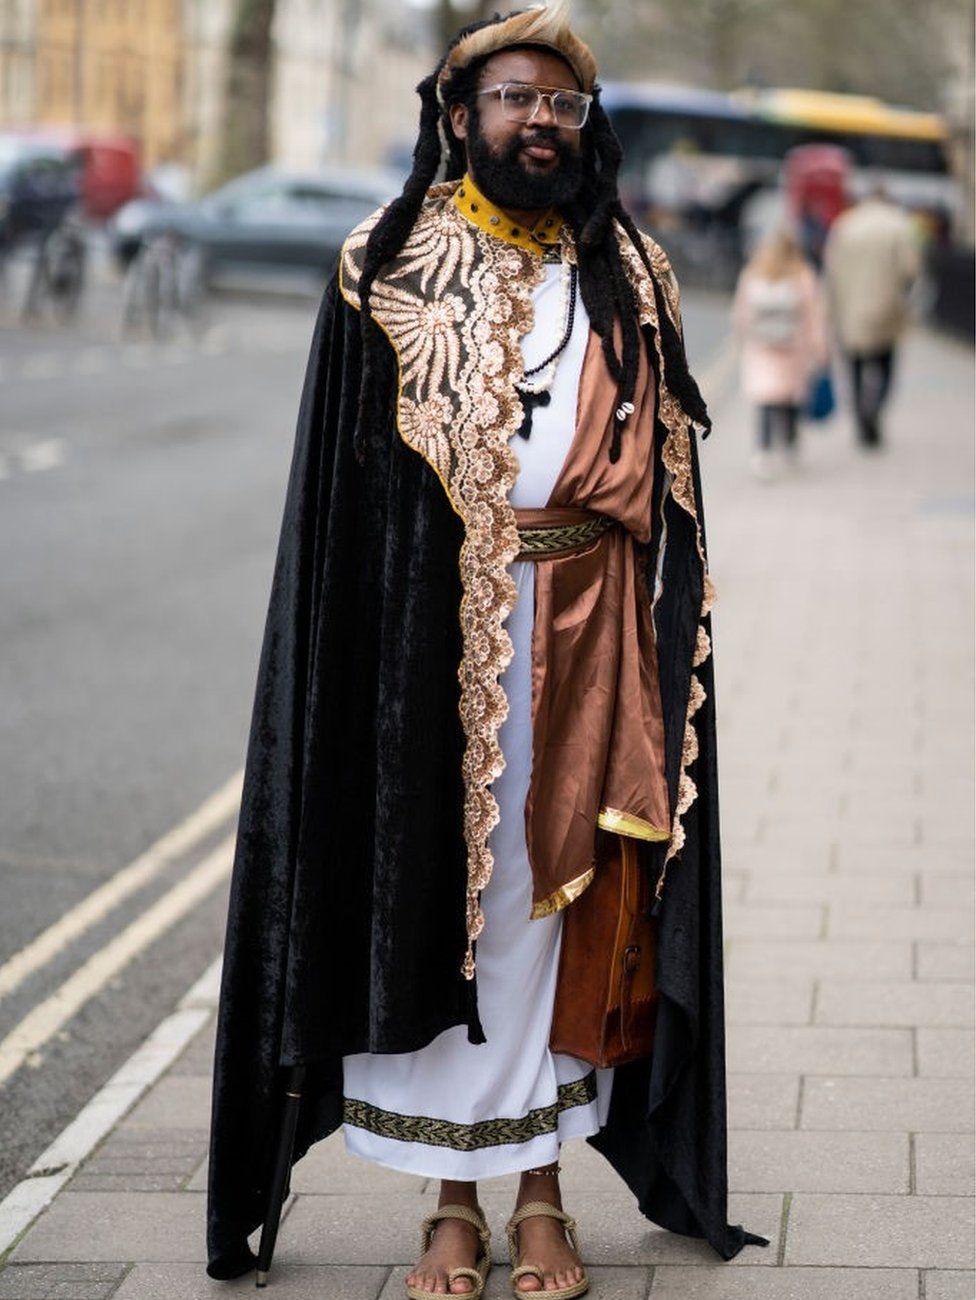 The Nigerian filmaker Onyeka Nwelue, posing for a photo on the street. He is wearing elaborate robes and sandals.